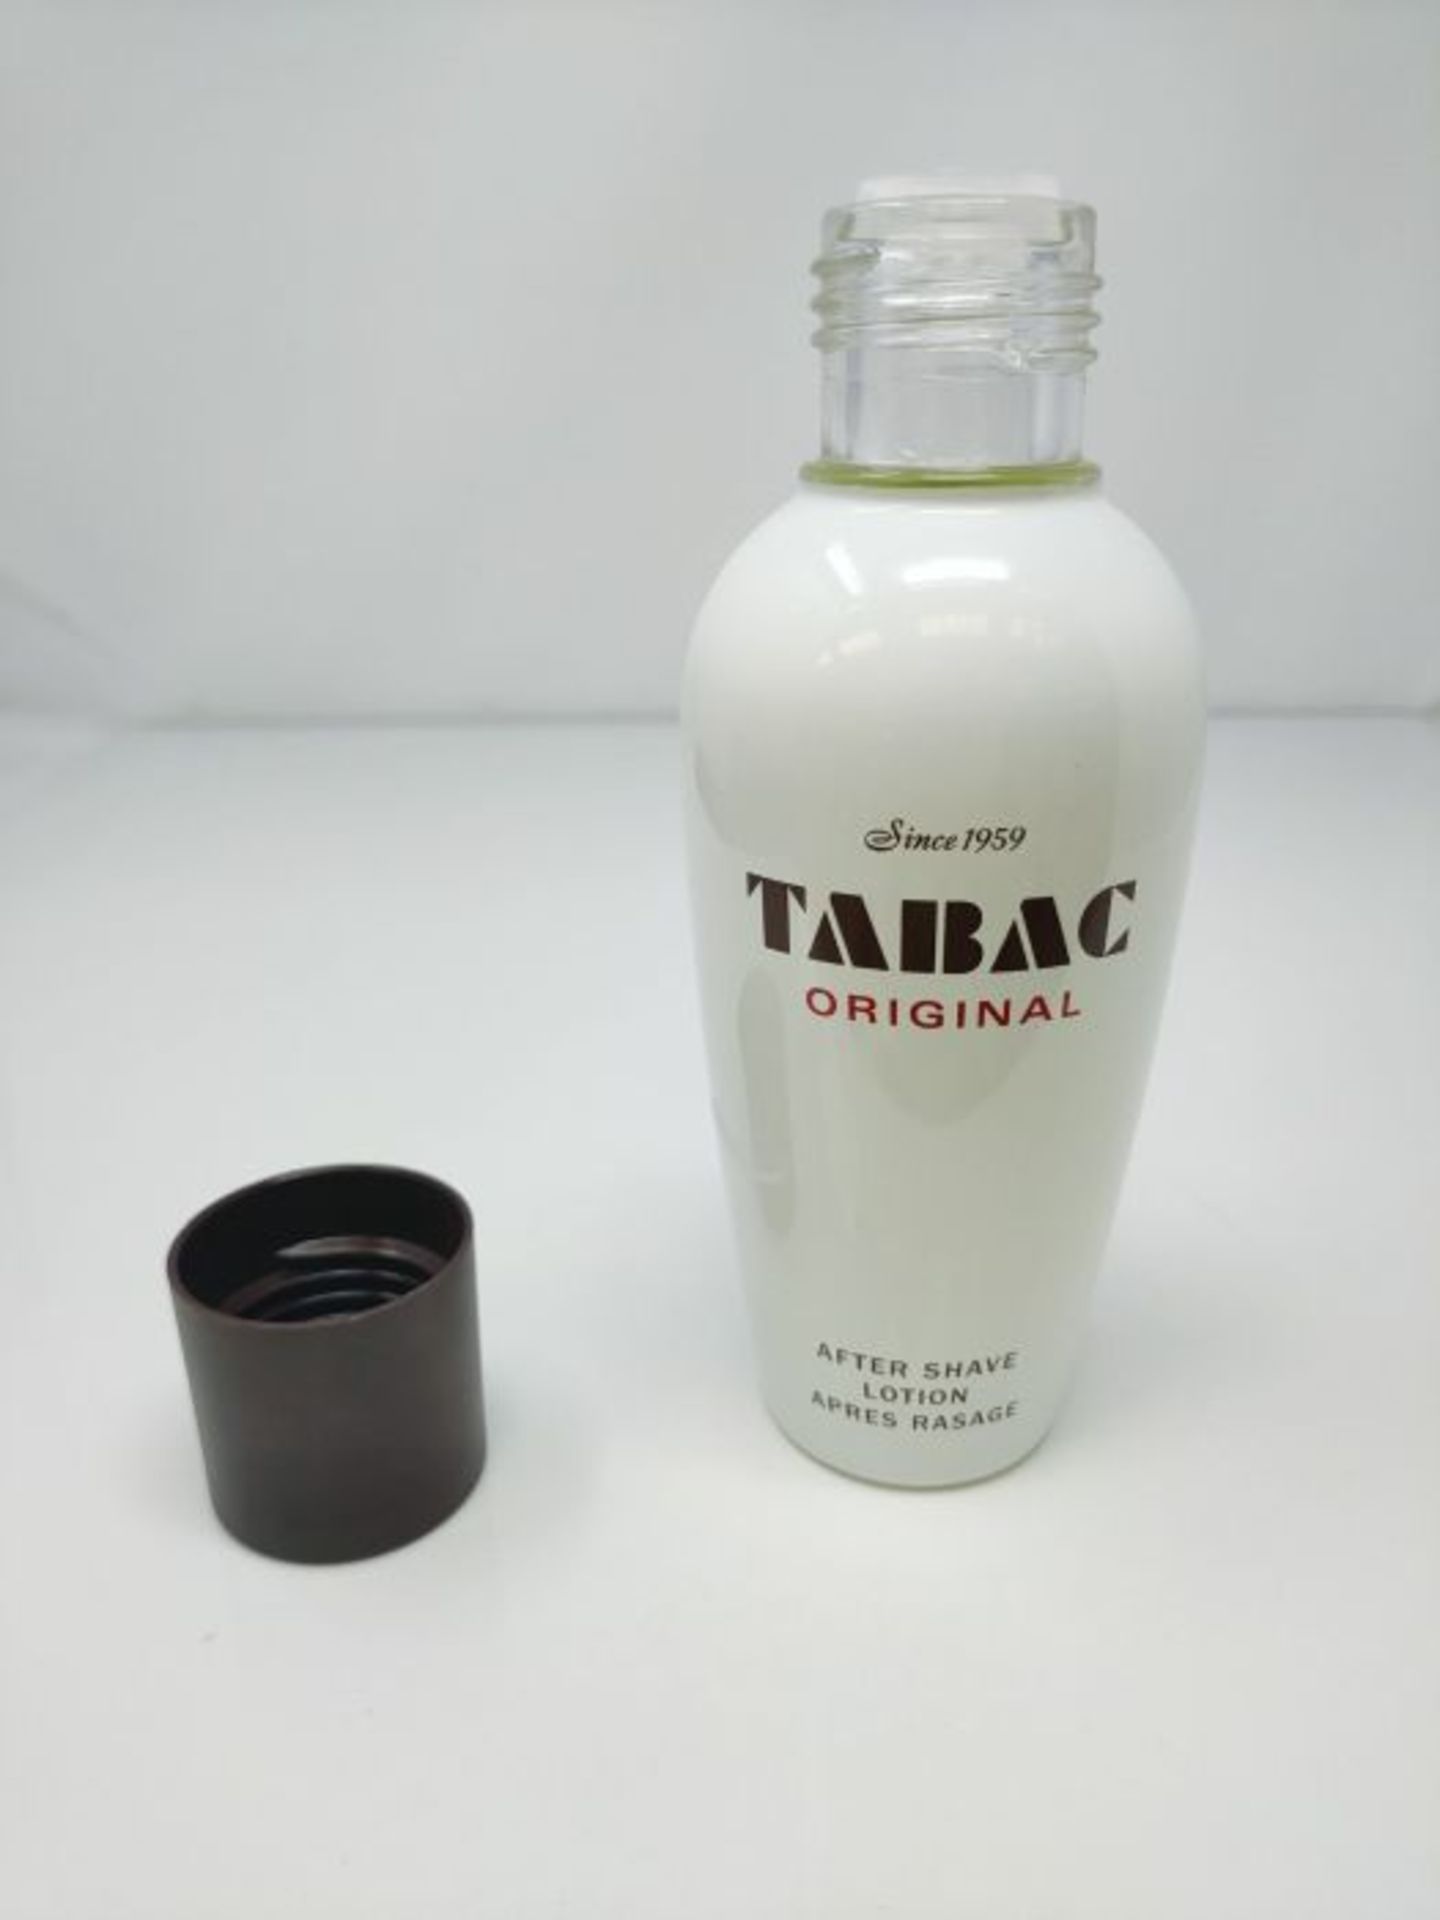 Tabac® Original I After Shave Lotion - Original Since 1959 - invigorates, cools and r - Image 2 of 4